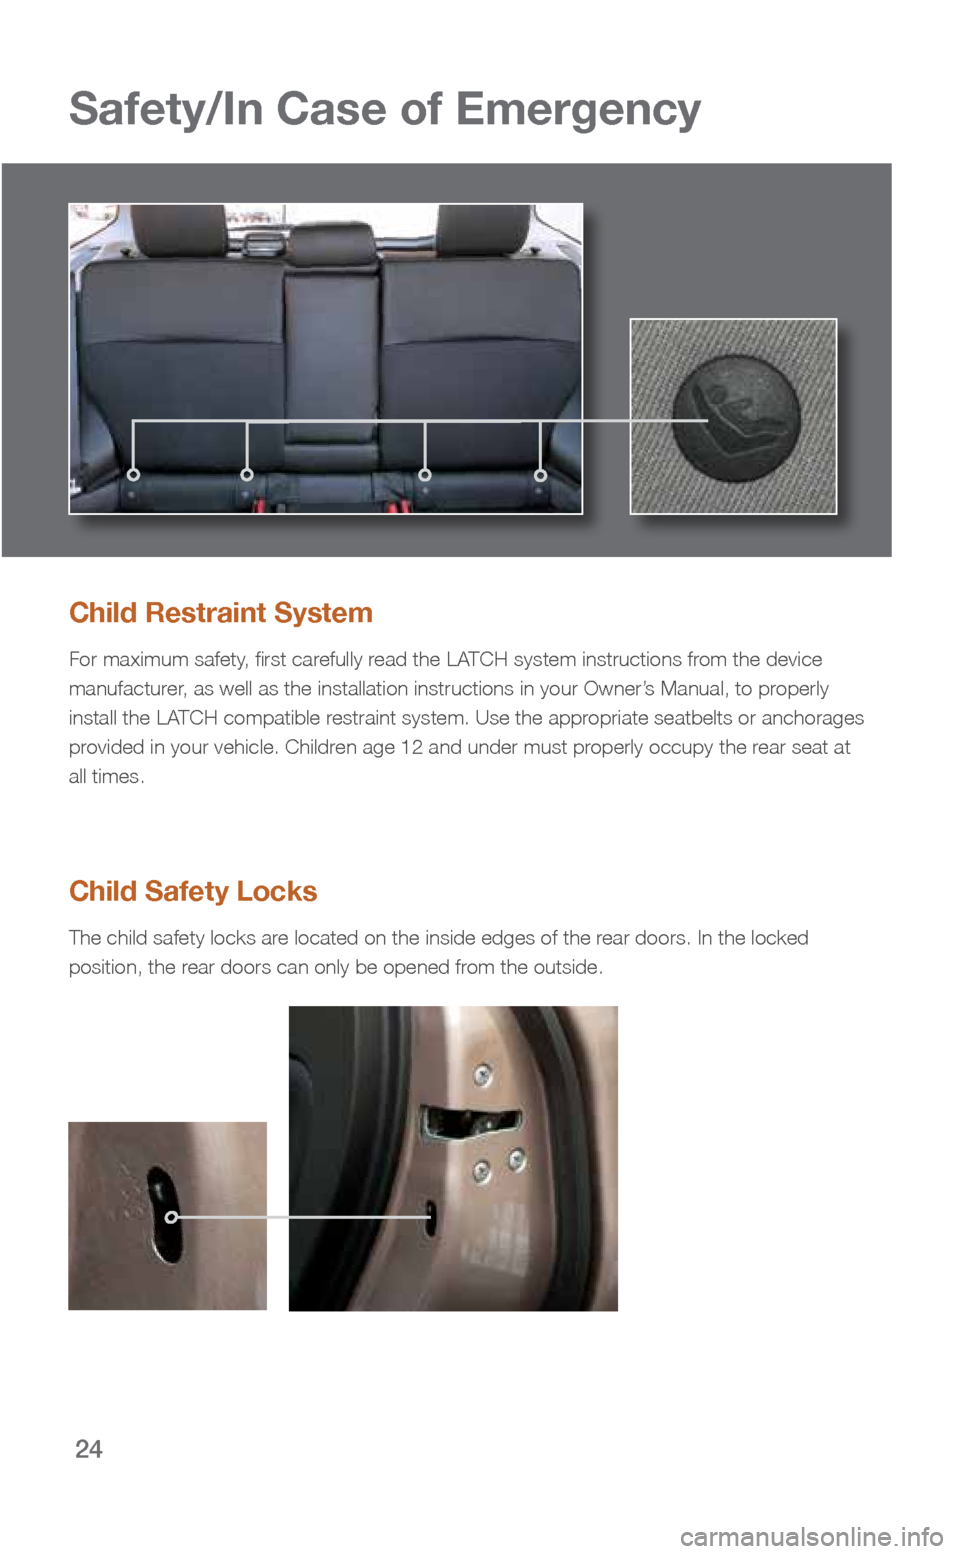 SUBARU FORESTER 2016 SJ / 4.G Quick Reference Guide 24
Safety/In Case of Emergency
Child Restraint System
For maximum safety, first carefully read the LATCH system instructions from the device 
manufacturer, as well as the installation instructions in 